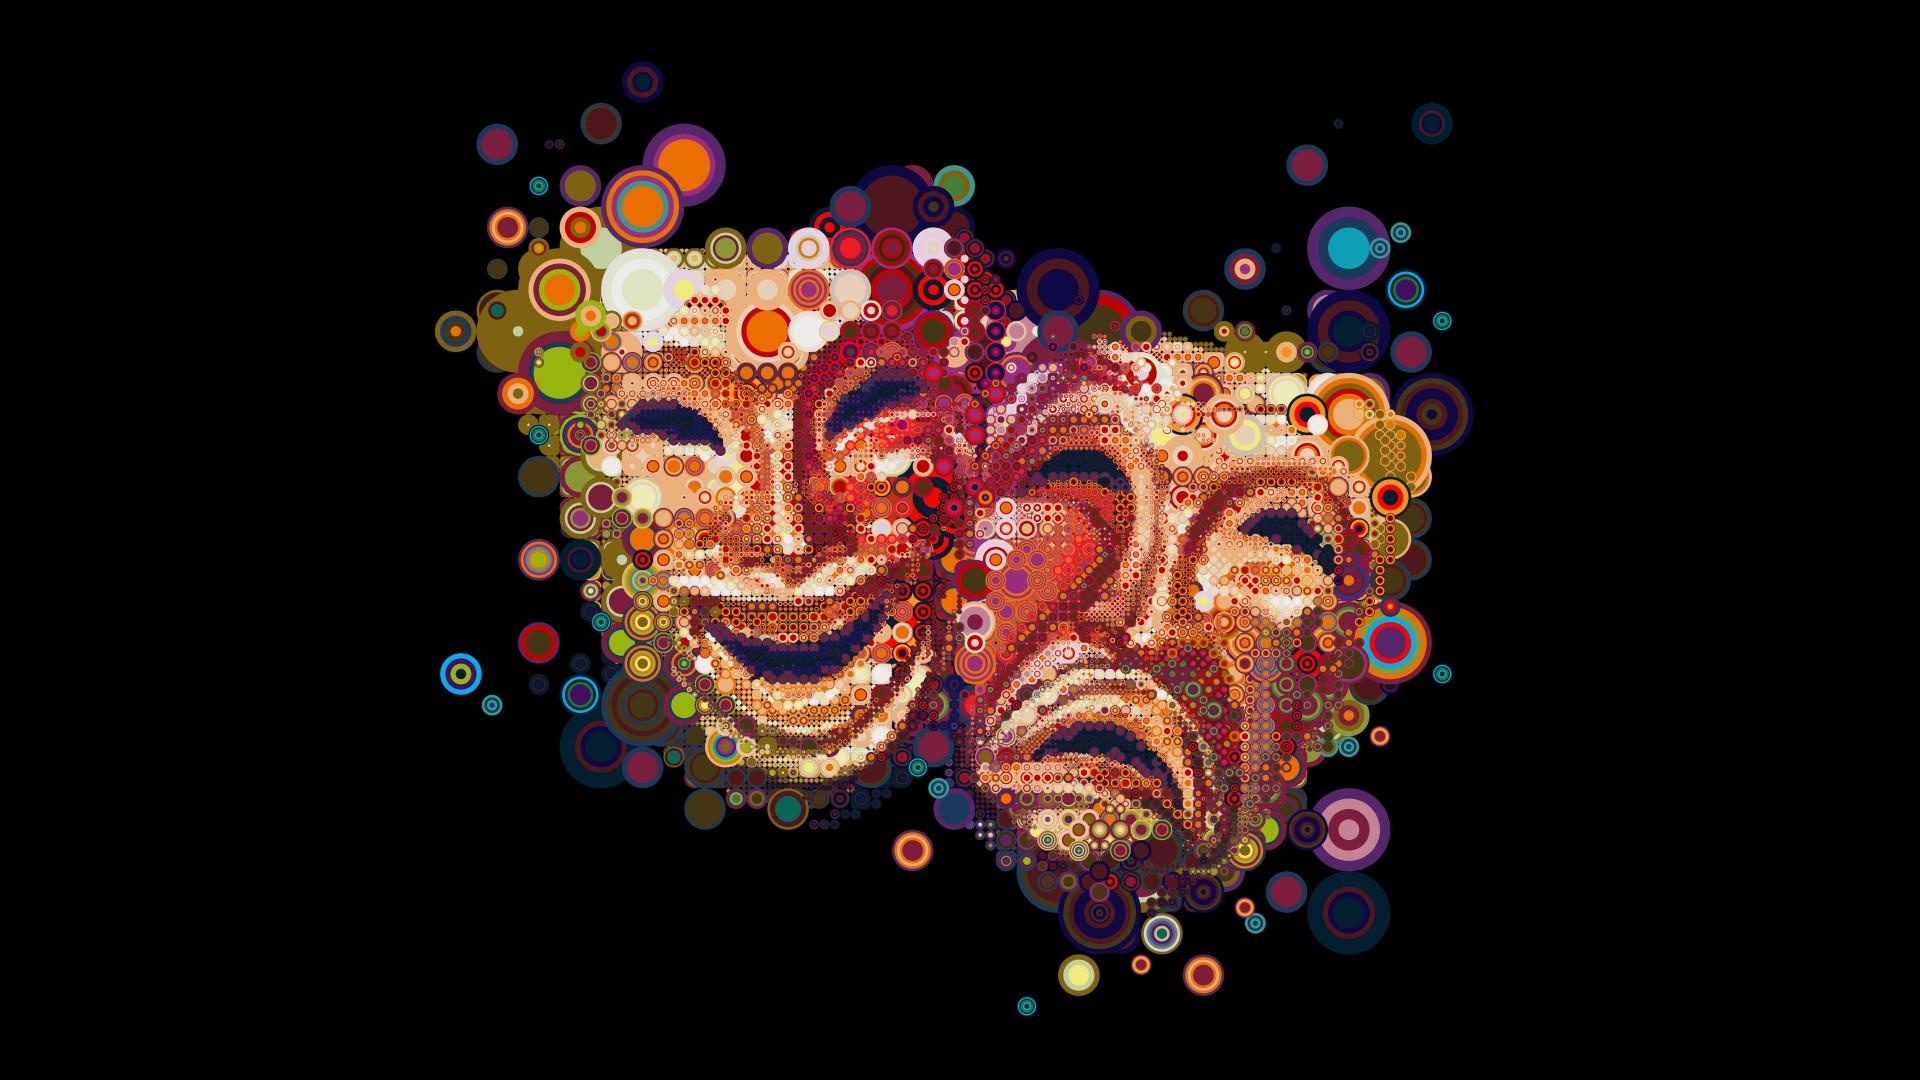 Theater masks, Dramatic expressions, Theatrical art, Visual storytelling, 1920x1080 Full HD Desktop